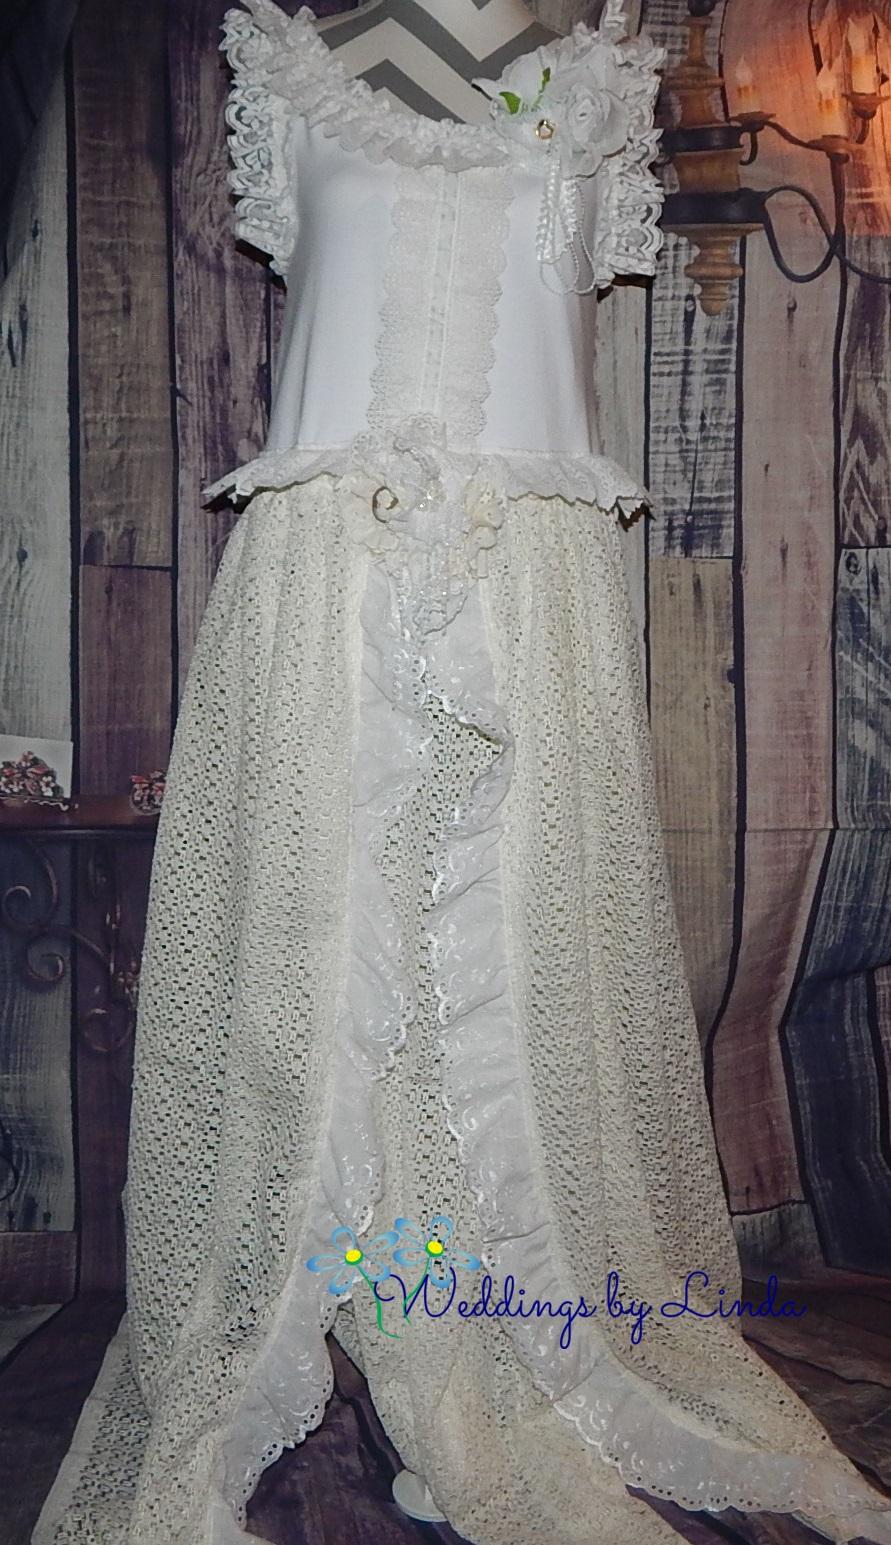 Wedding - Lady's Vintage Lace Bridal & Formal Dress/Gown RTS one of a kind